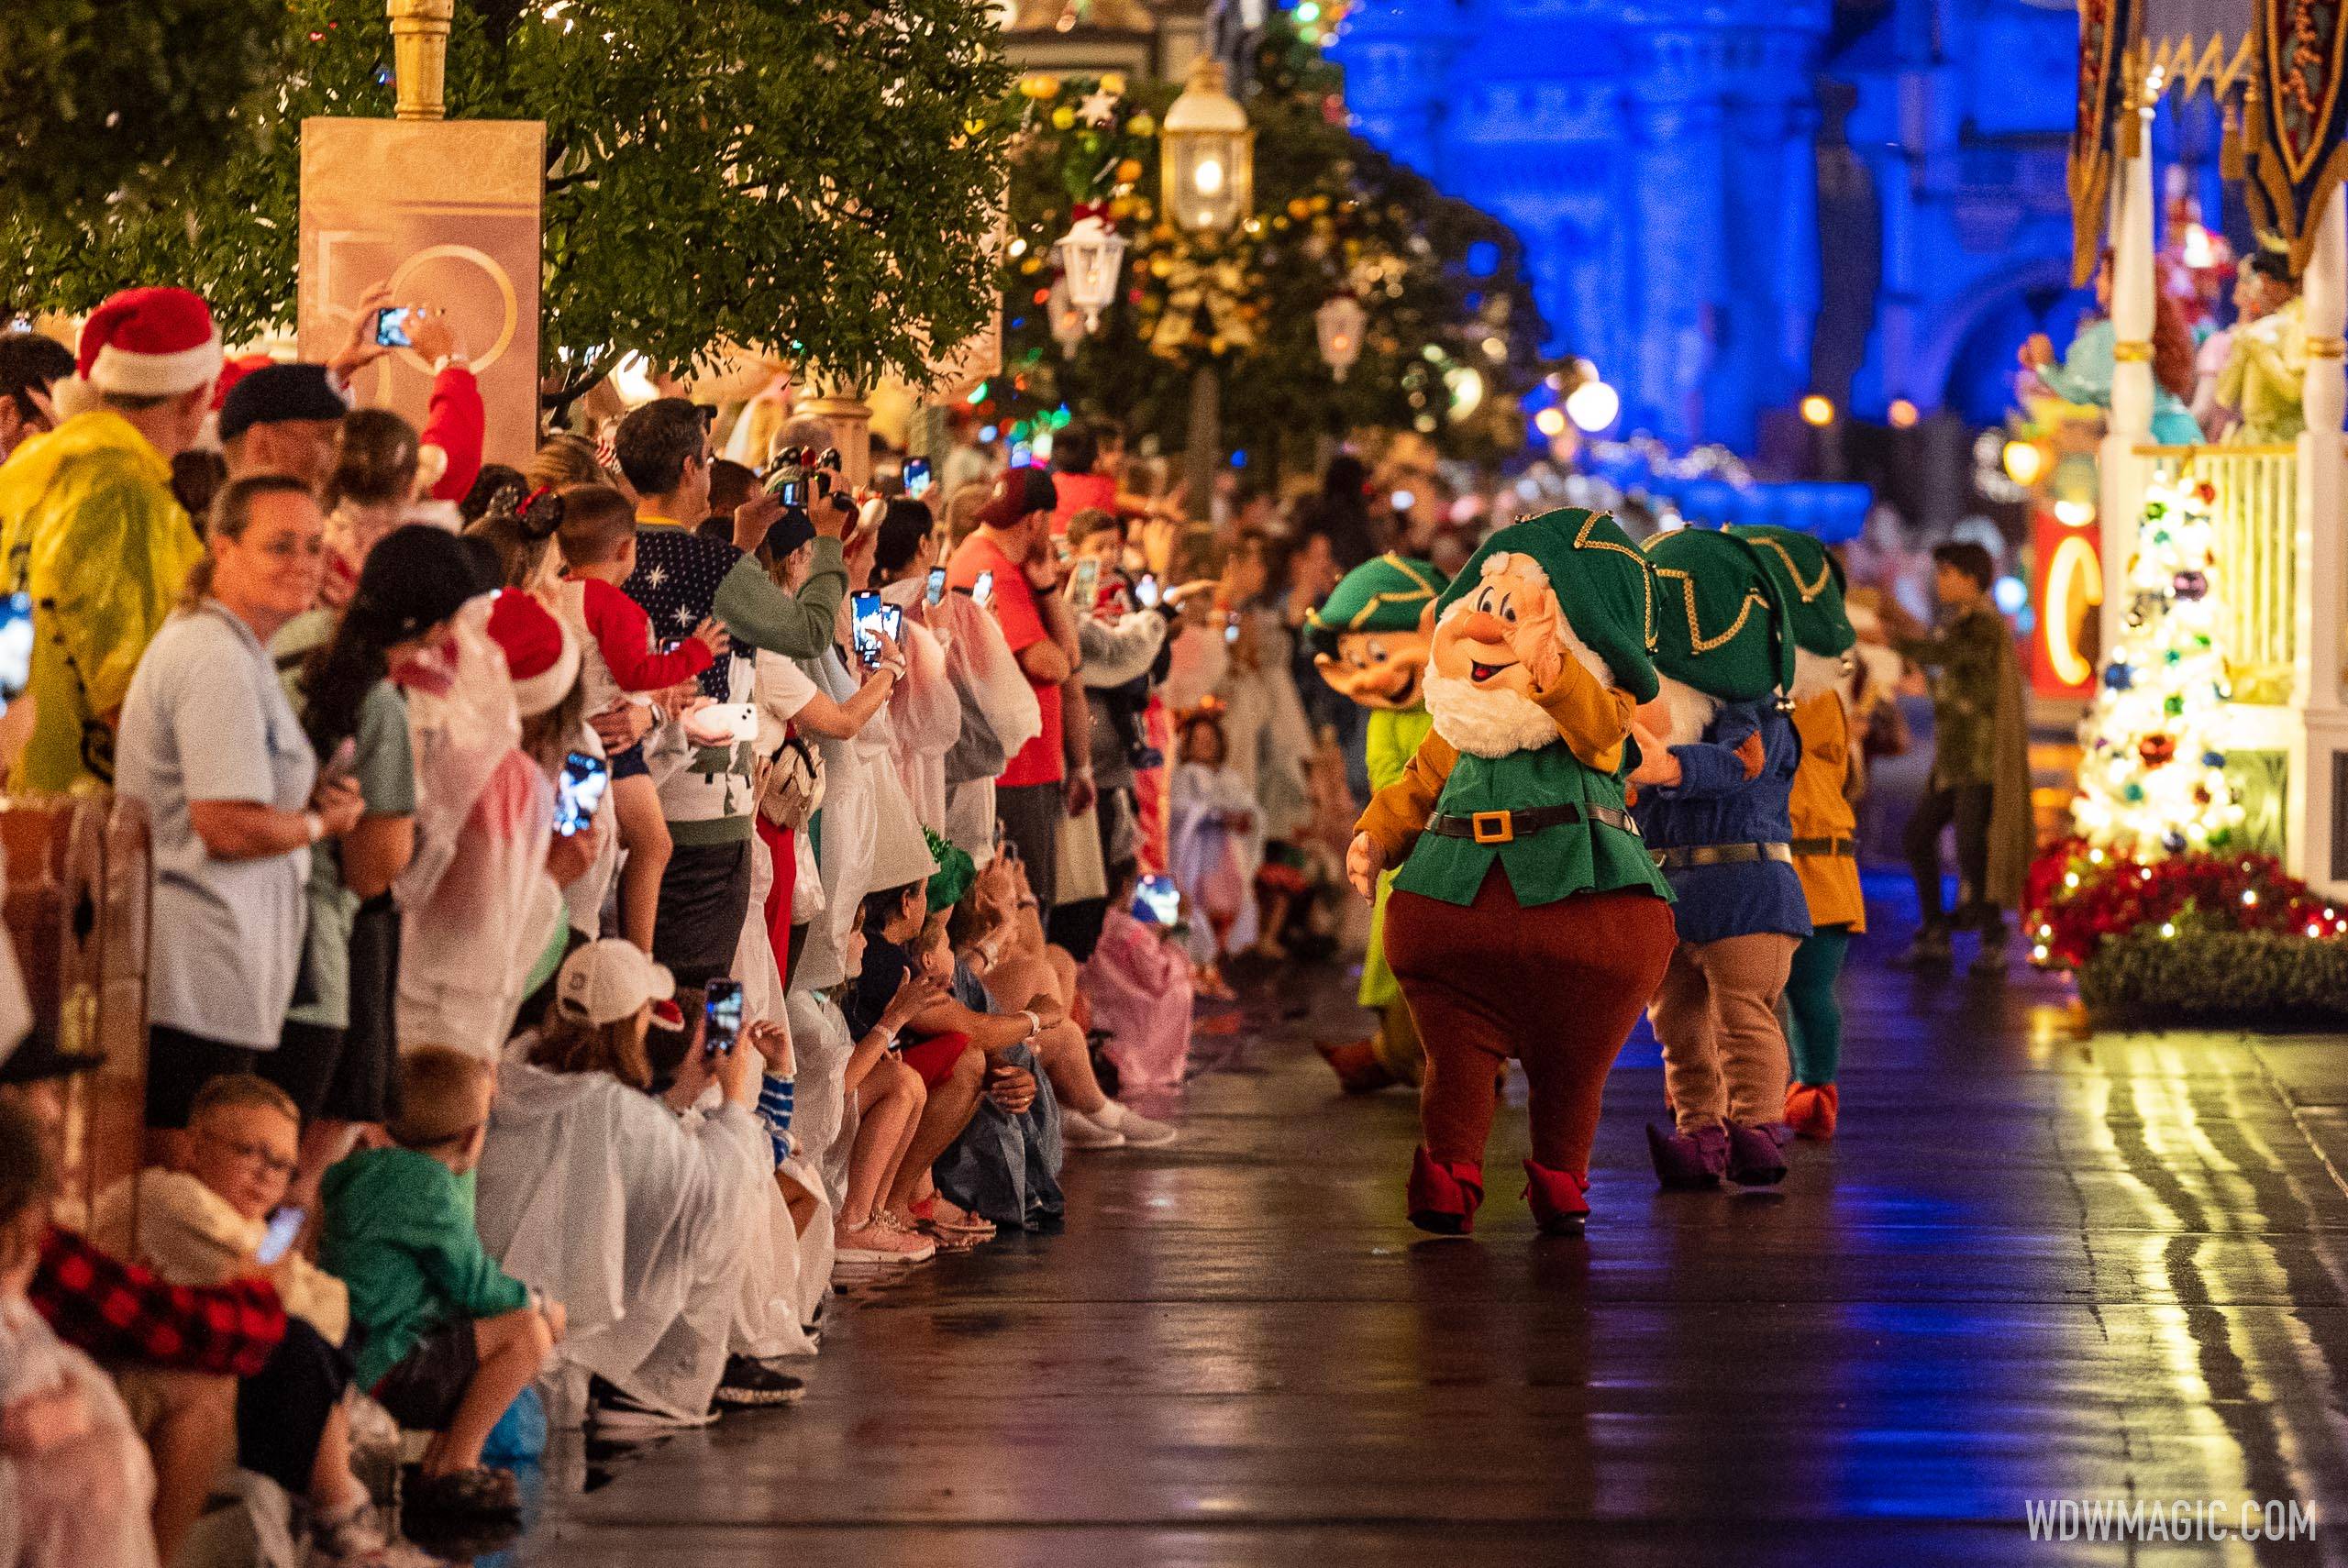 Mickey's Once Upon a Christmastime Parade scheduled during regular hours in mid-November at Magic Kingdom